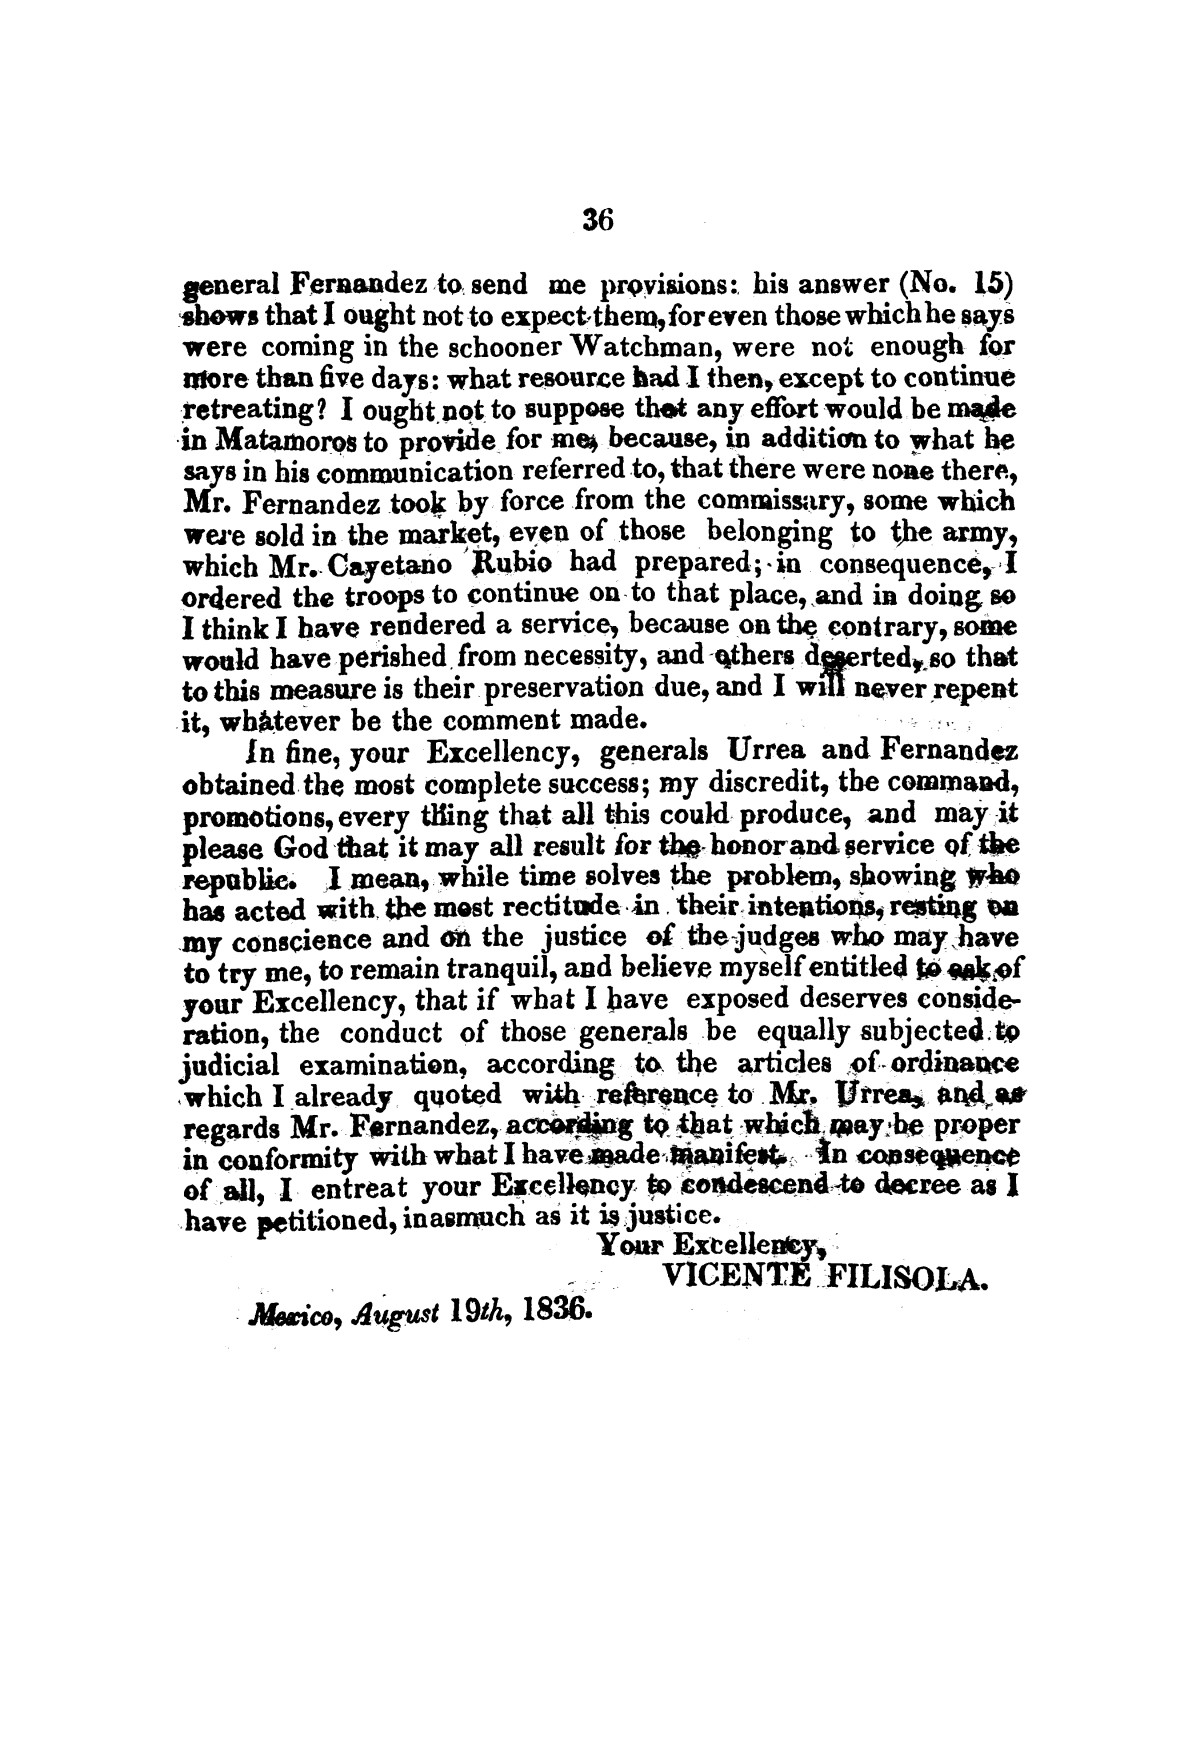 Evacuation of Texas : translation of the Representation addressed to the supreme government / by Vicente Filisola, in defence of his honor, and explanation of his operations as commander-in-chief of the army against Texas.
                                                
                                                    [Sequence #]: 39 of 72
                                                